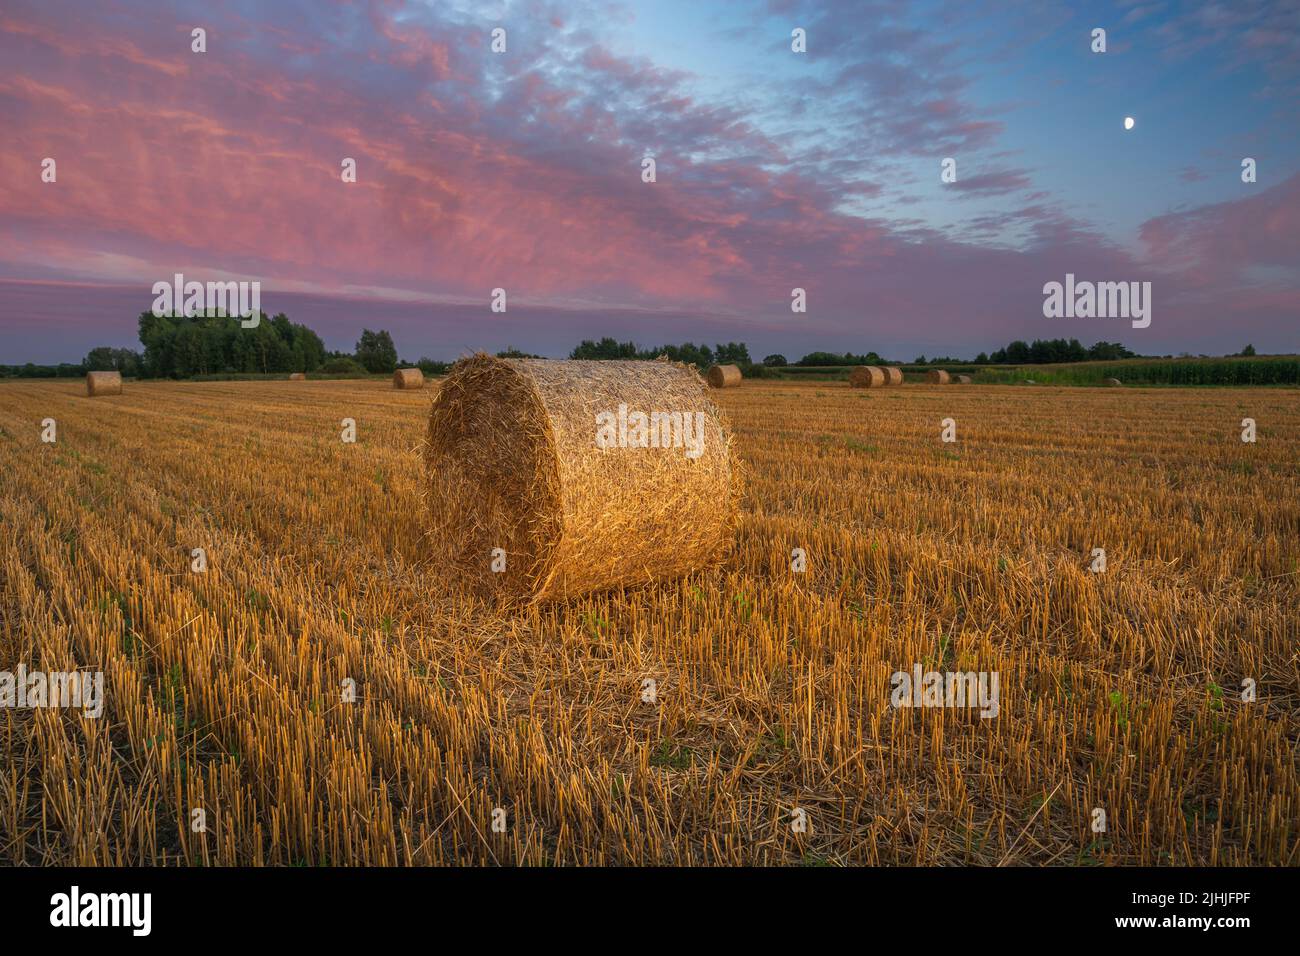 Colorful evening clouds and hay bales in the field, beautiful rural landscape Stock Photo